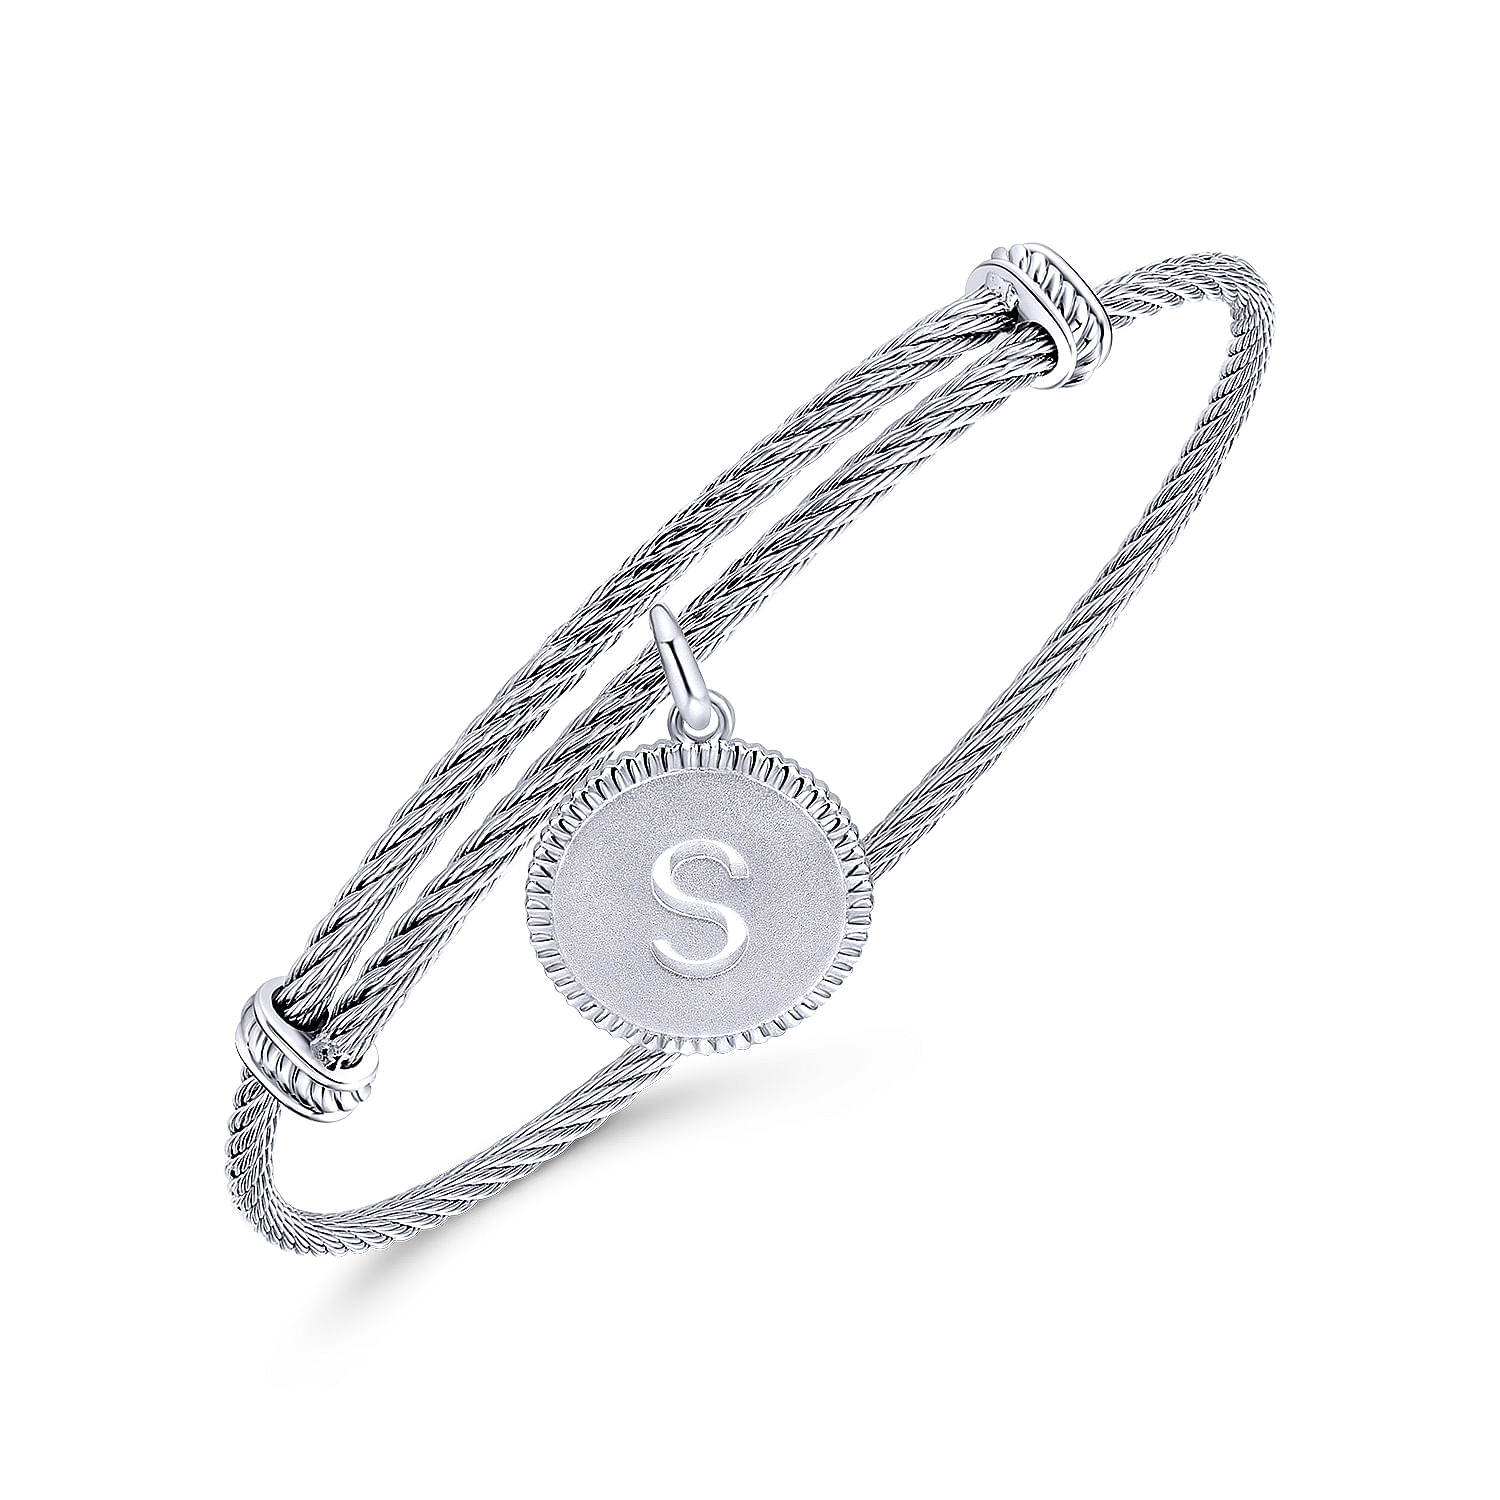 Adjustable Twisted Cable Stainless Steel Bangle with Sterling Silver S Initial Charm